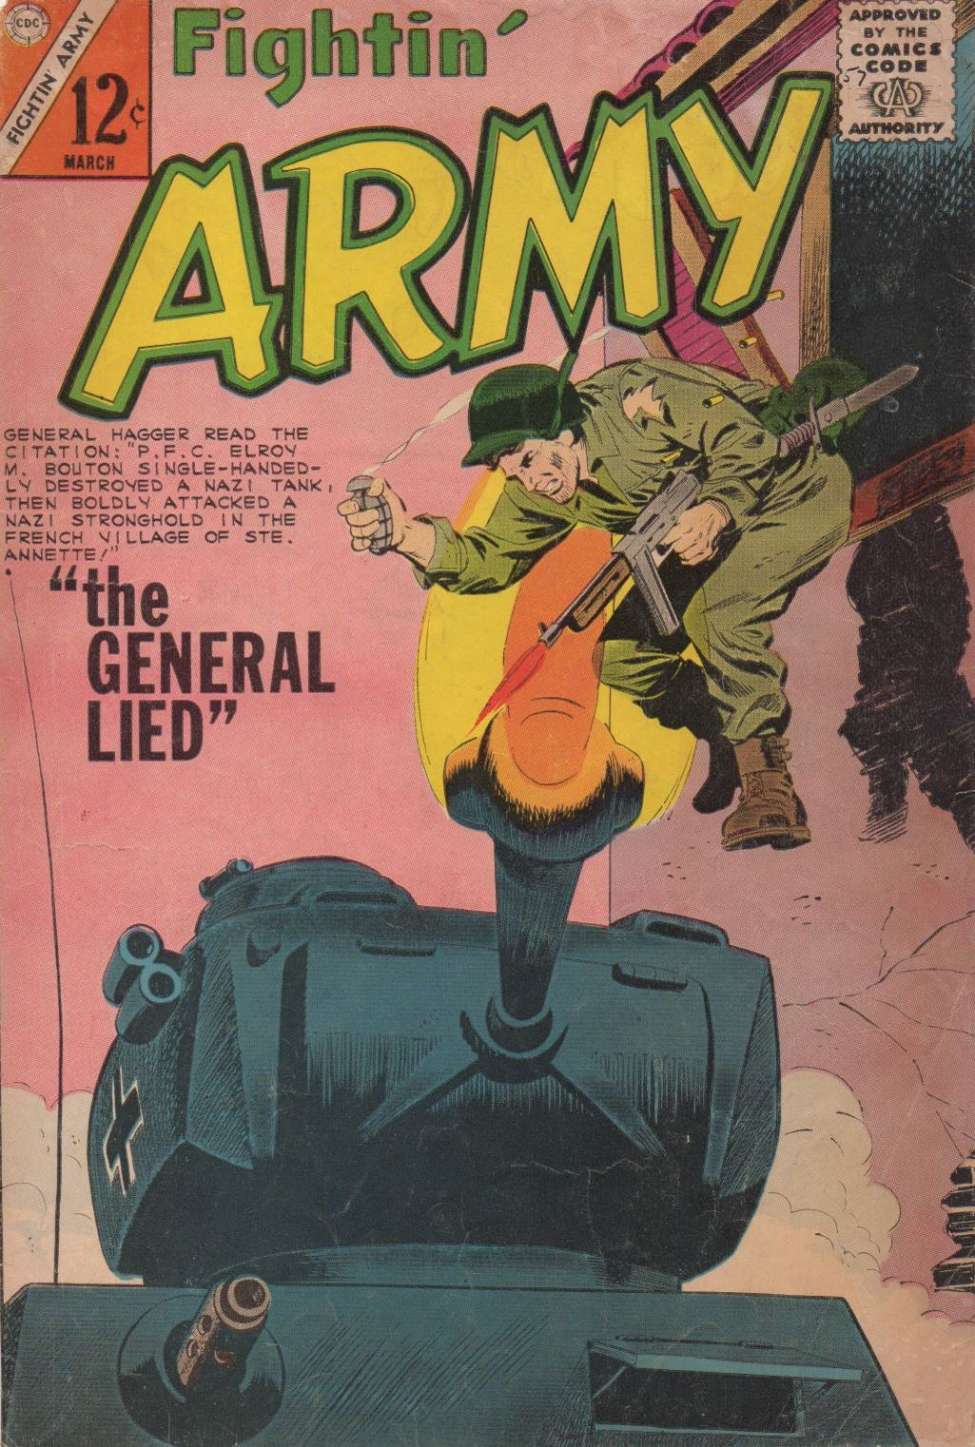 Book Cover For Fightin' Army 57